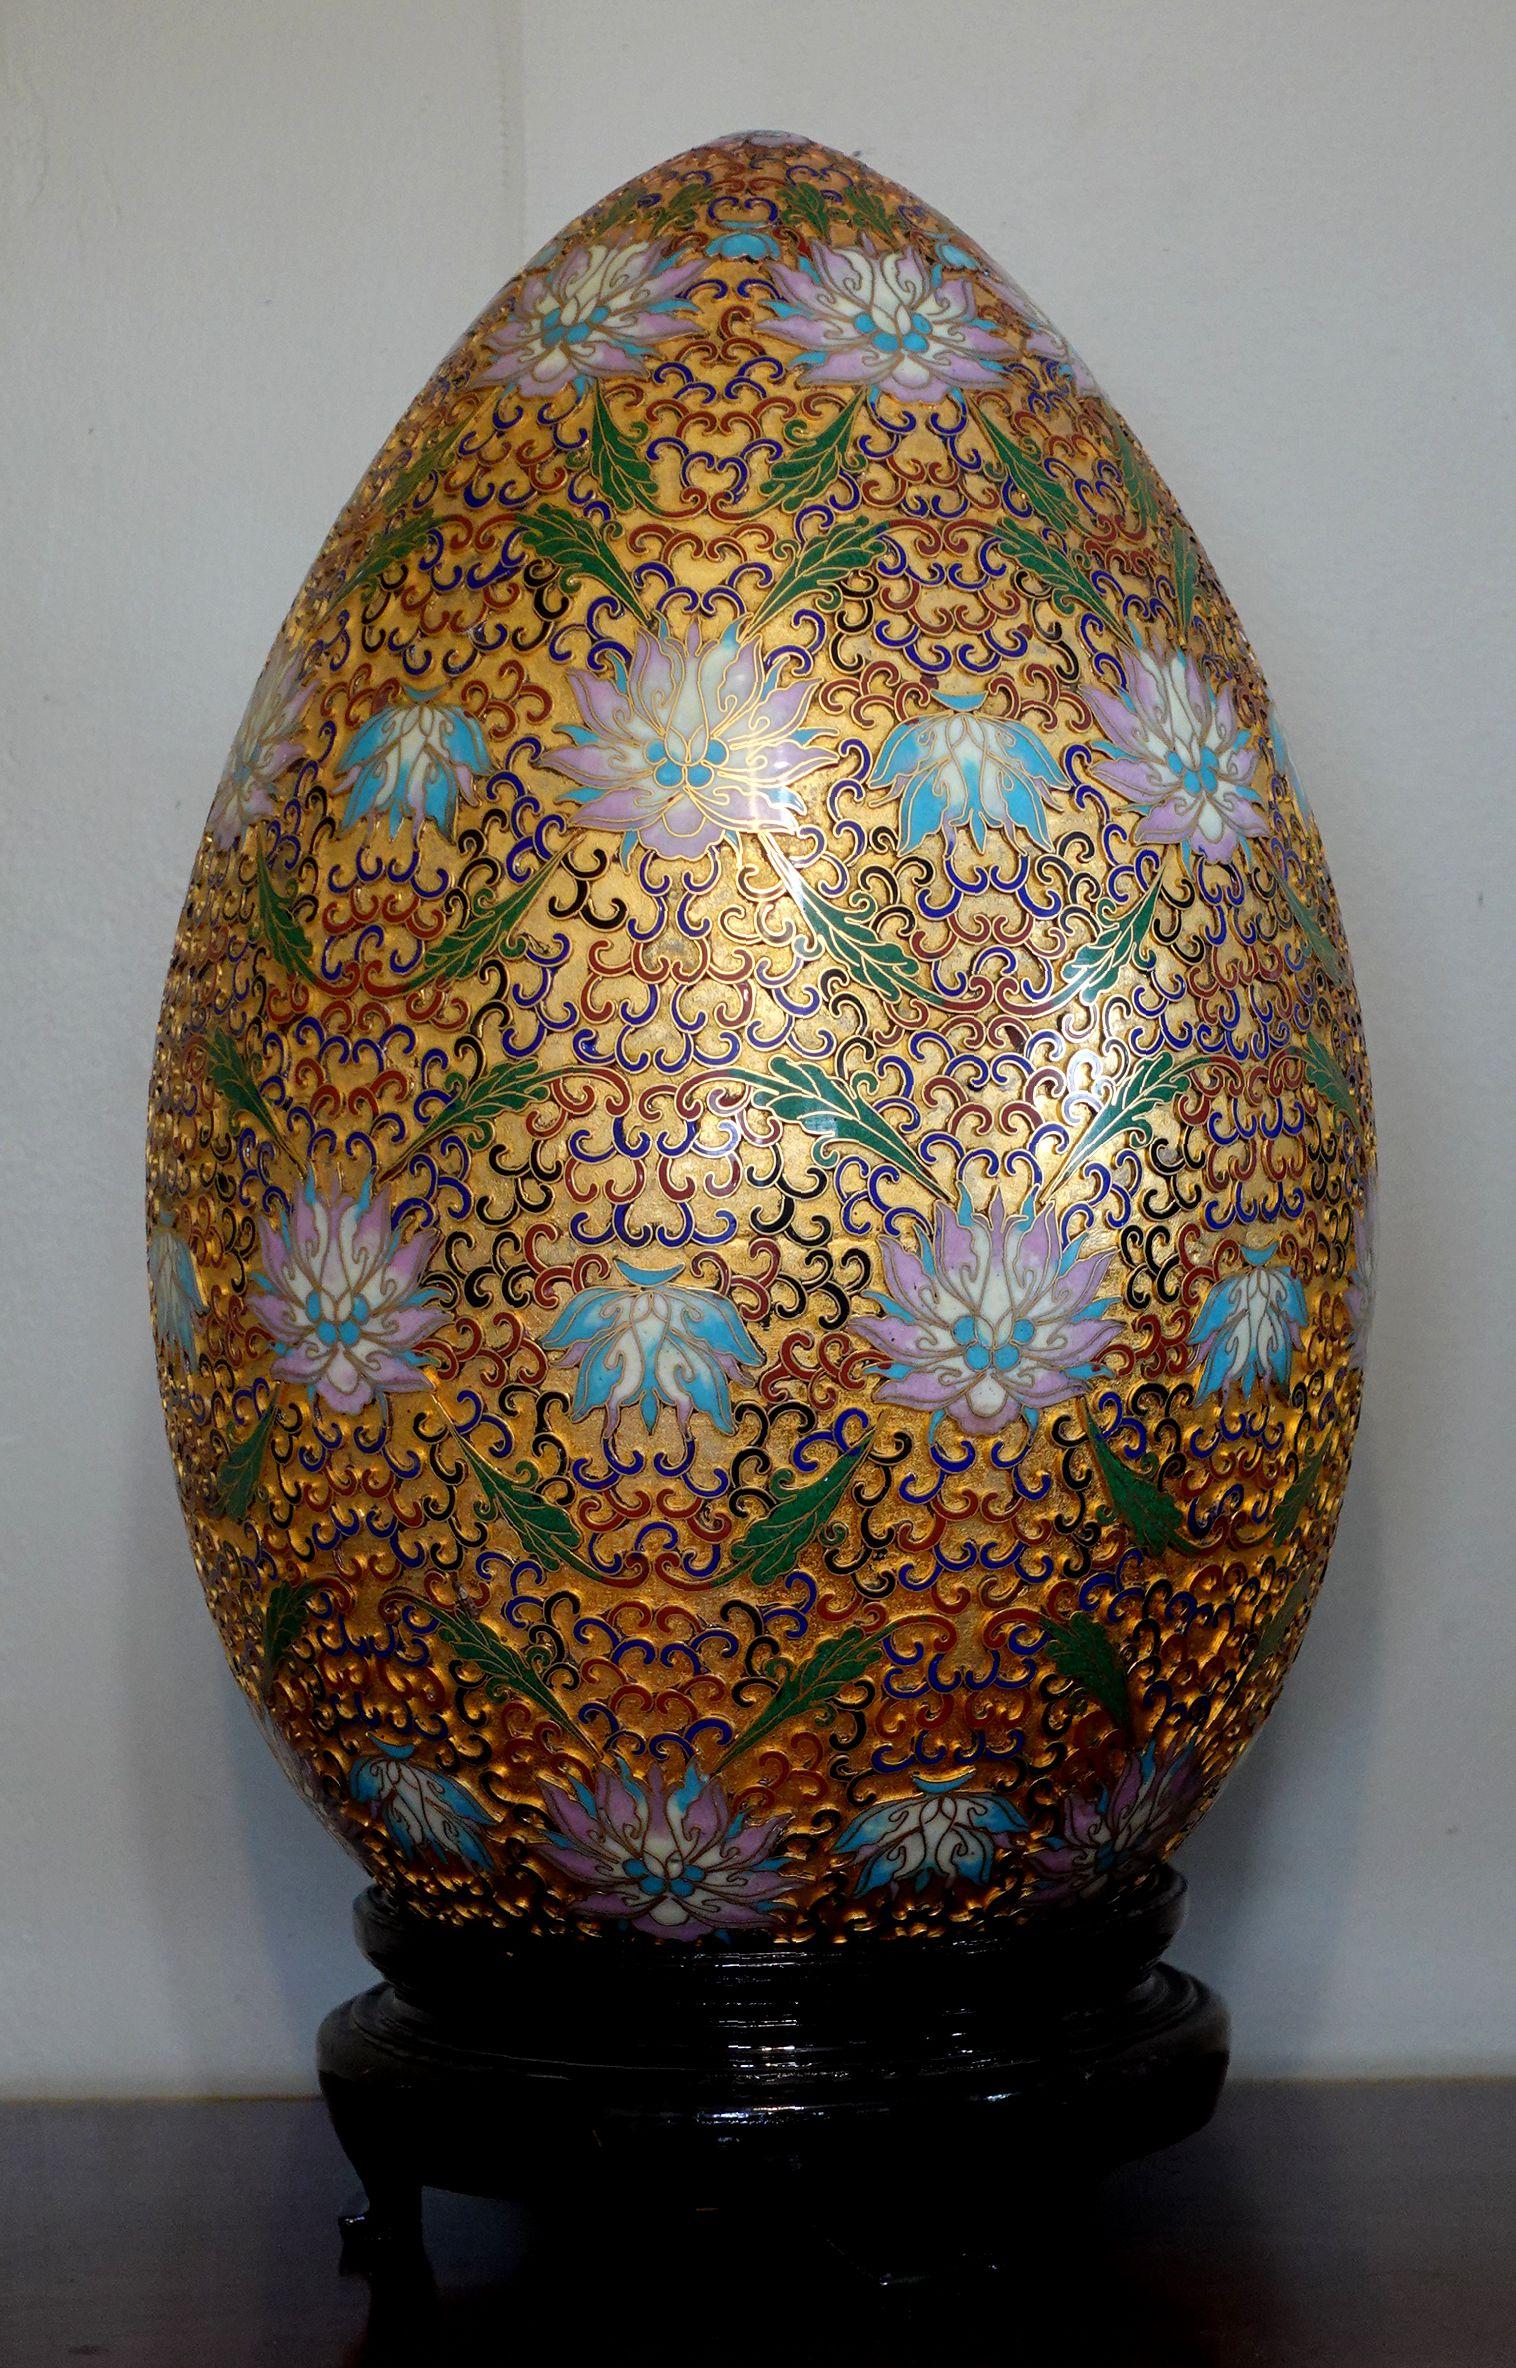 Presenting a very large and beautiful Chinese cloisonné enamel egg with intricated patterns made by hand seating on a wood stand, early 20 century. It's measured about 17